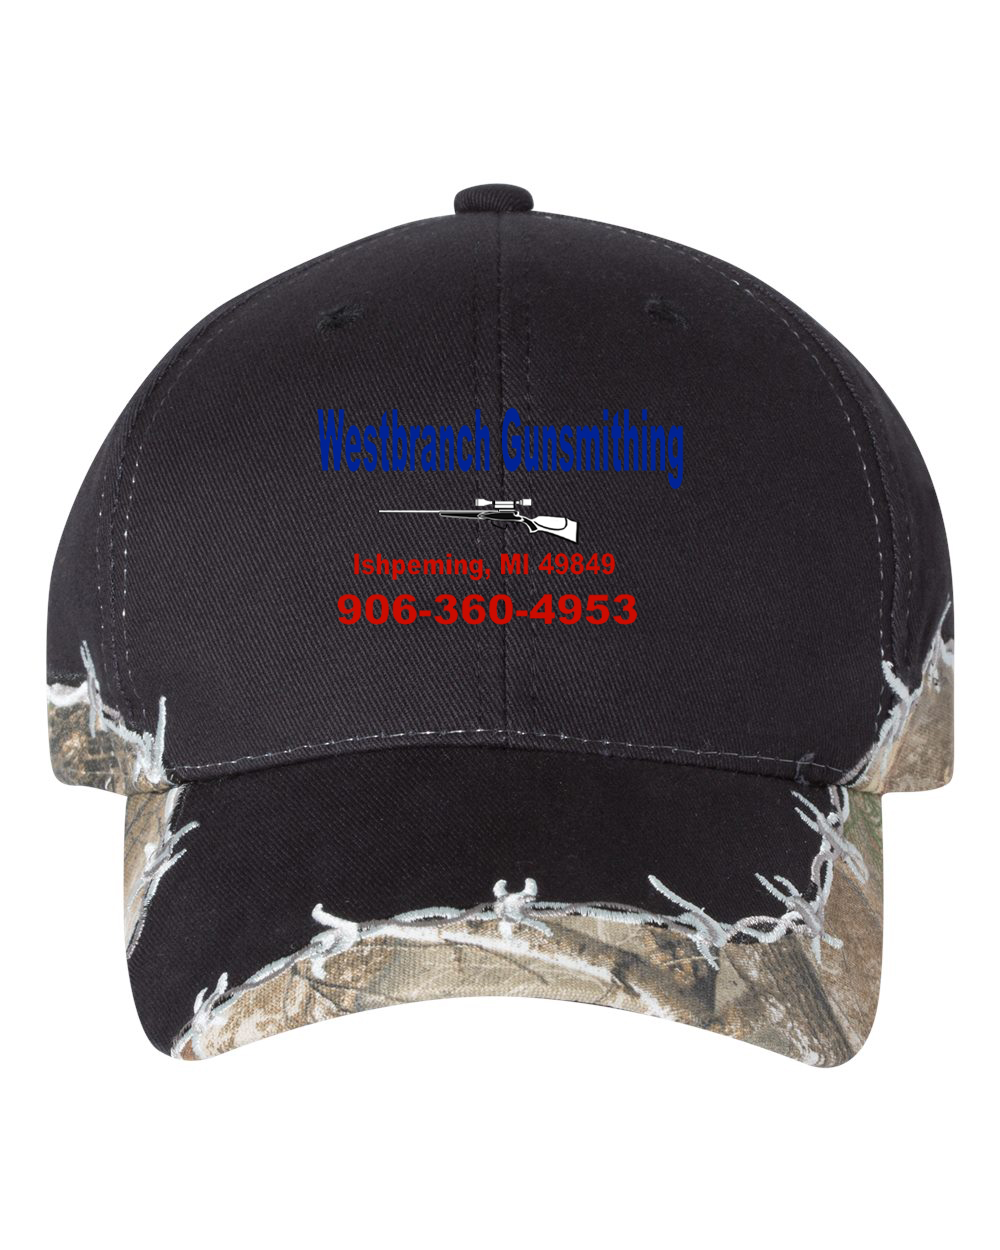 custom design of Camouflage piping design brushed cotton twill two tone color six panel low profile pro style caps